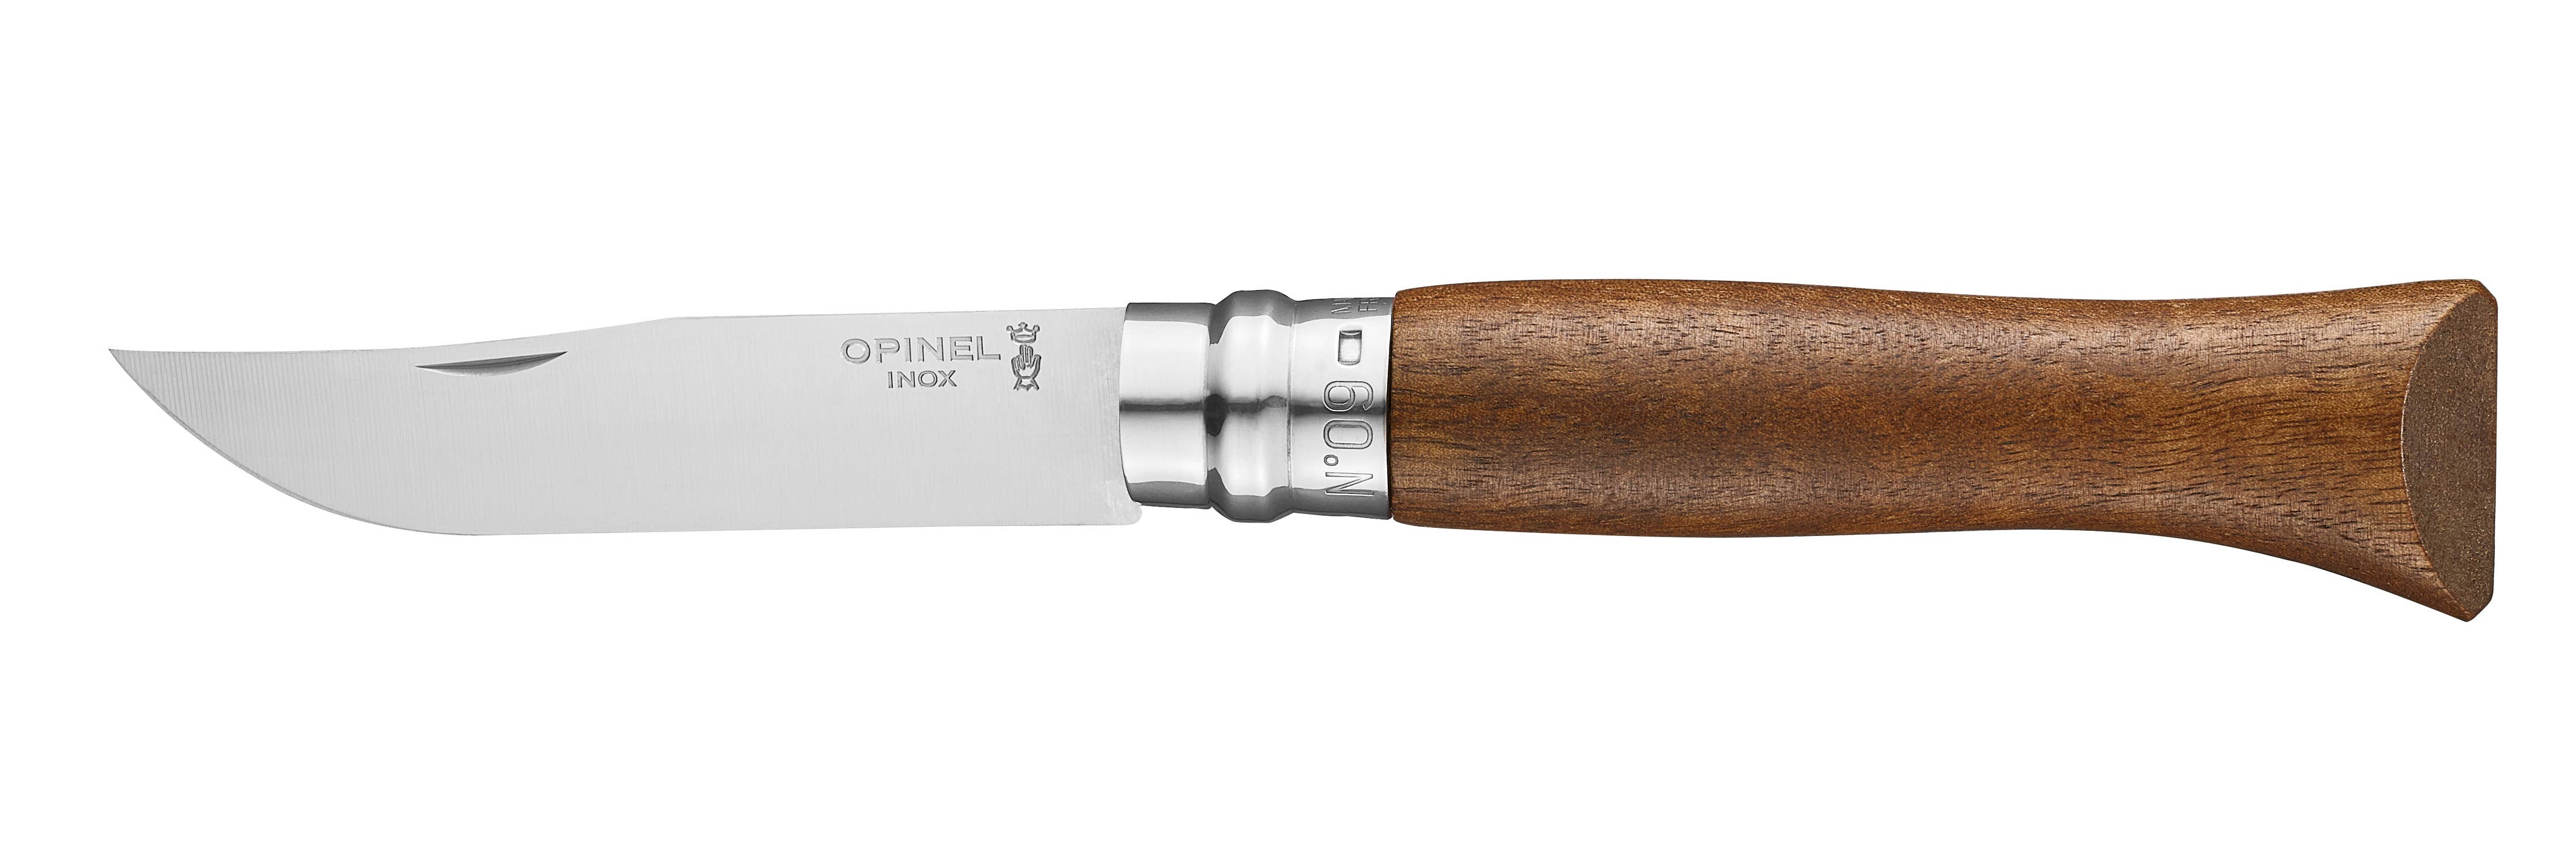 Stainless Premium Wood Folding Knive